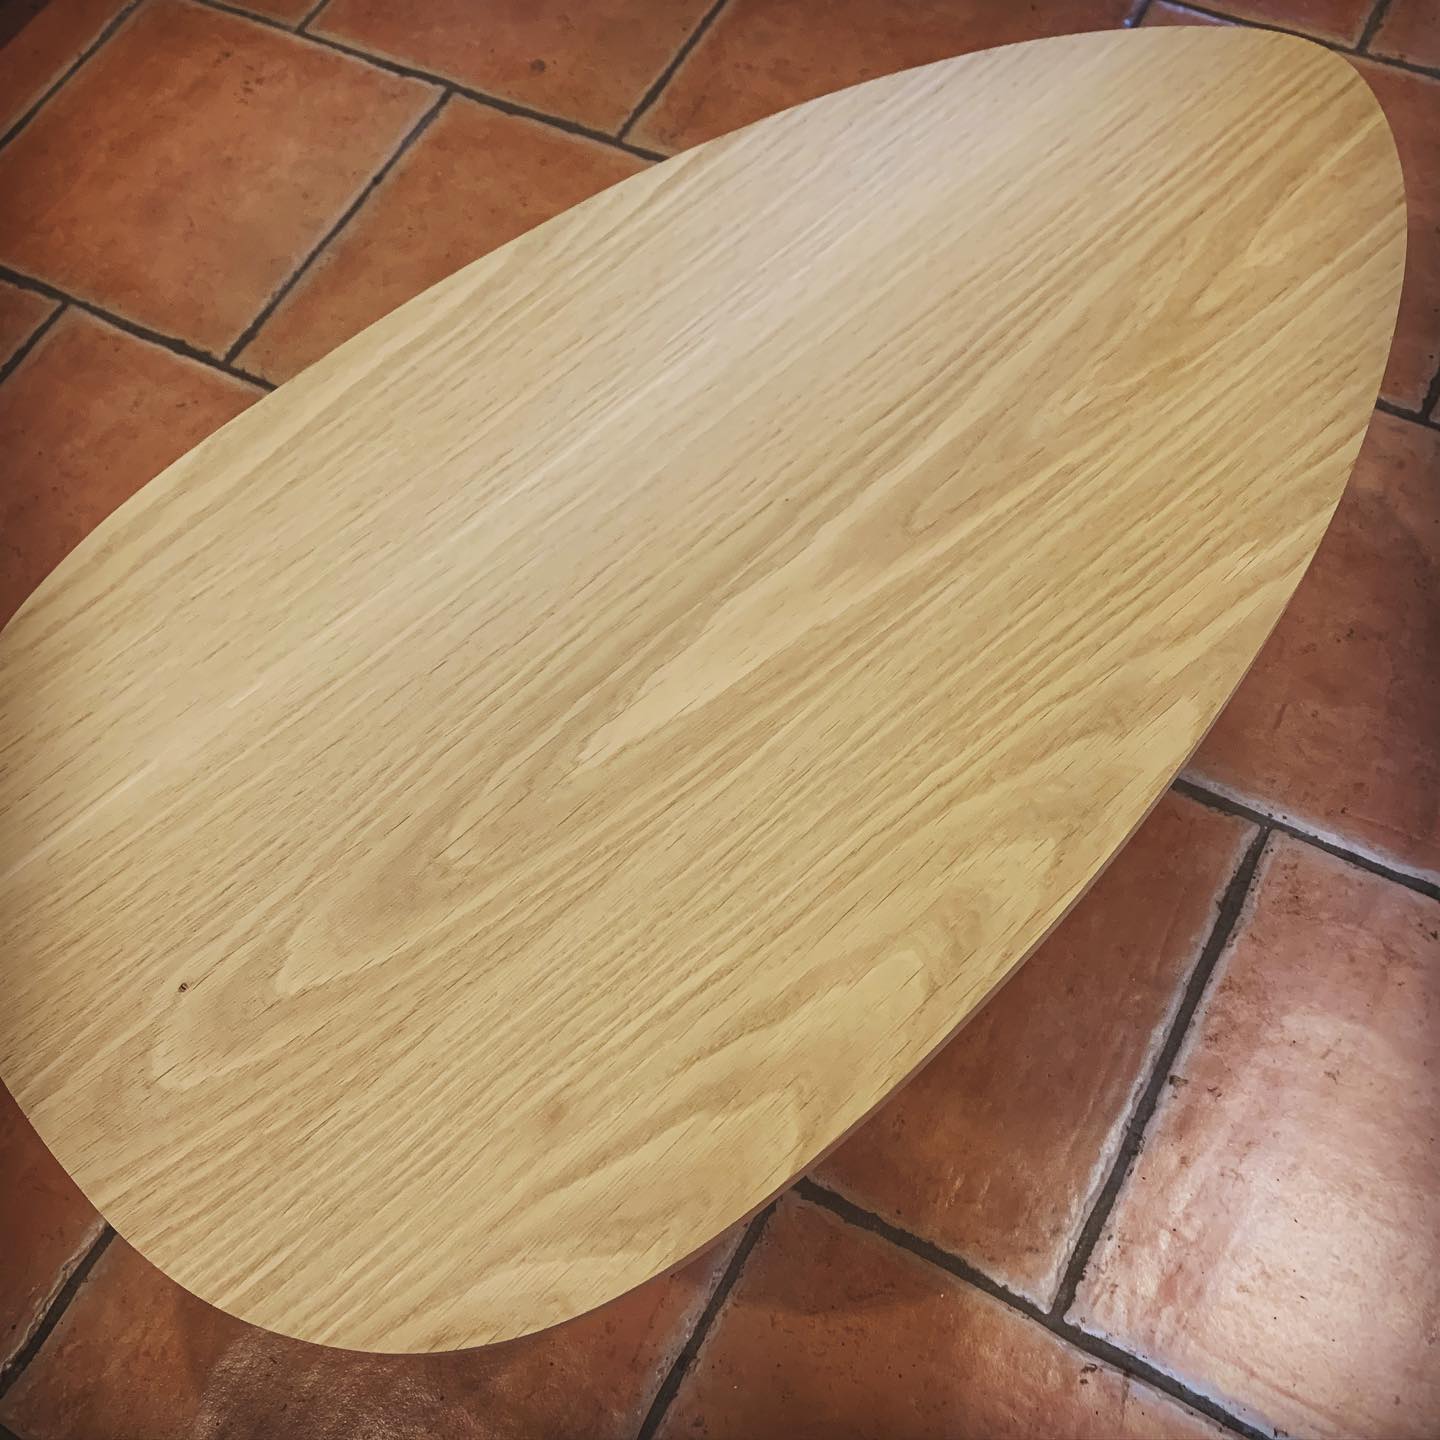 So pleased with the progress on this Ercol Style coffee table! #workinprogress #midcenturymodern #oak #handmade #watchthisspace